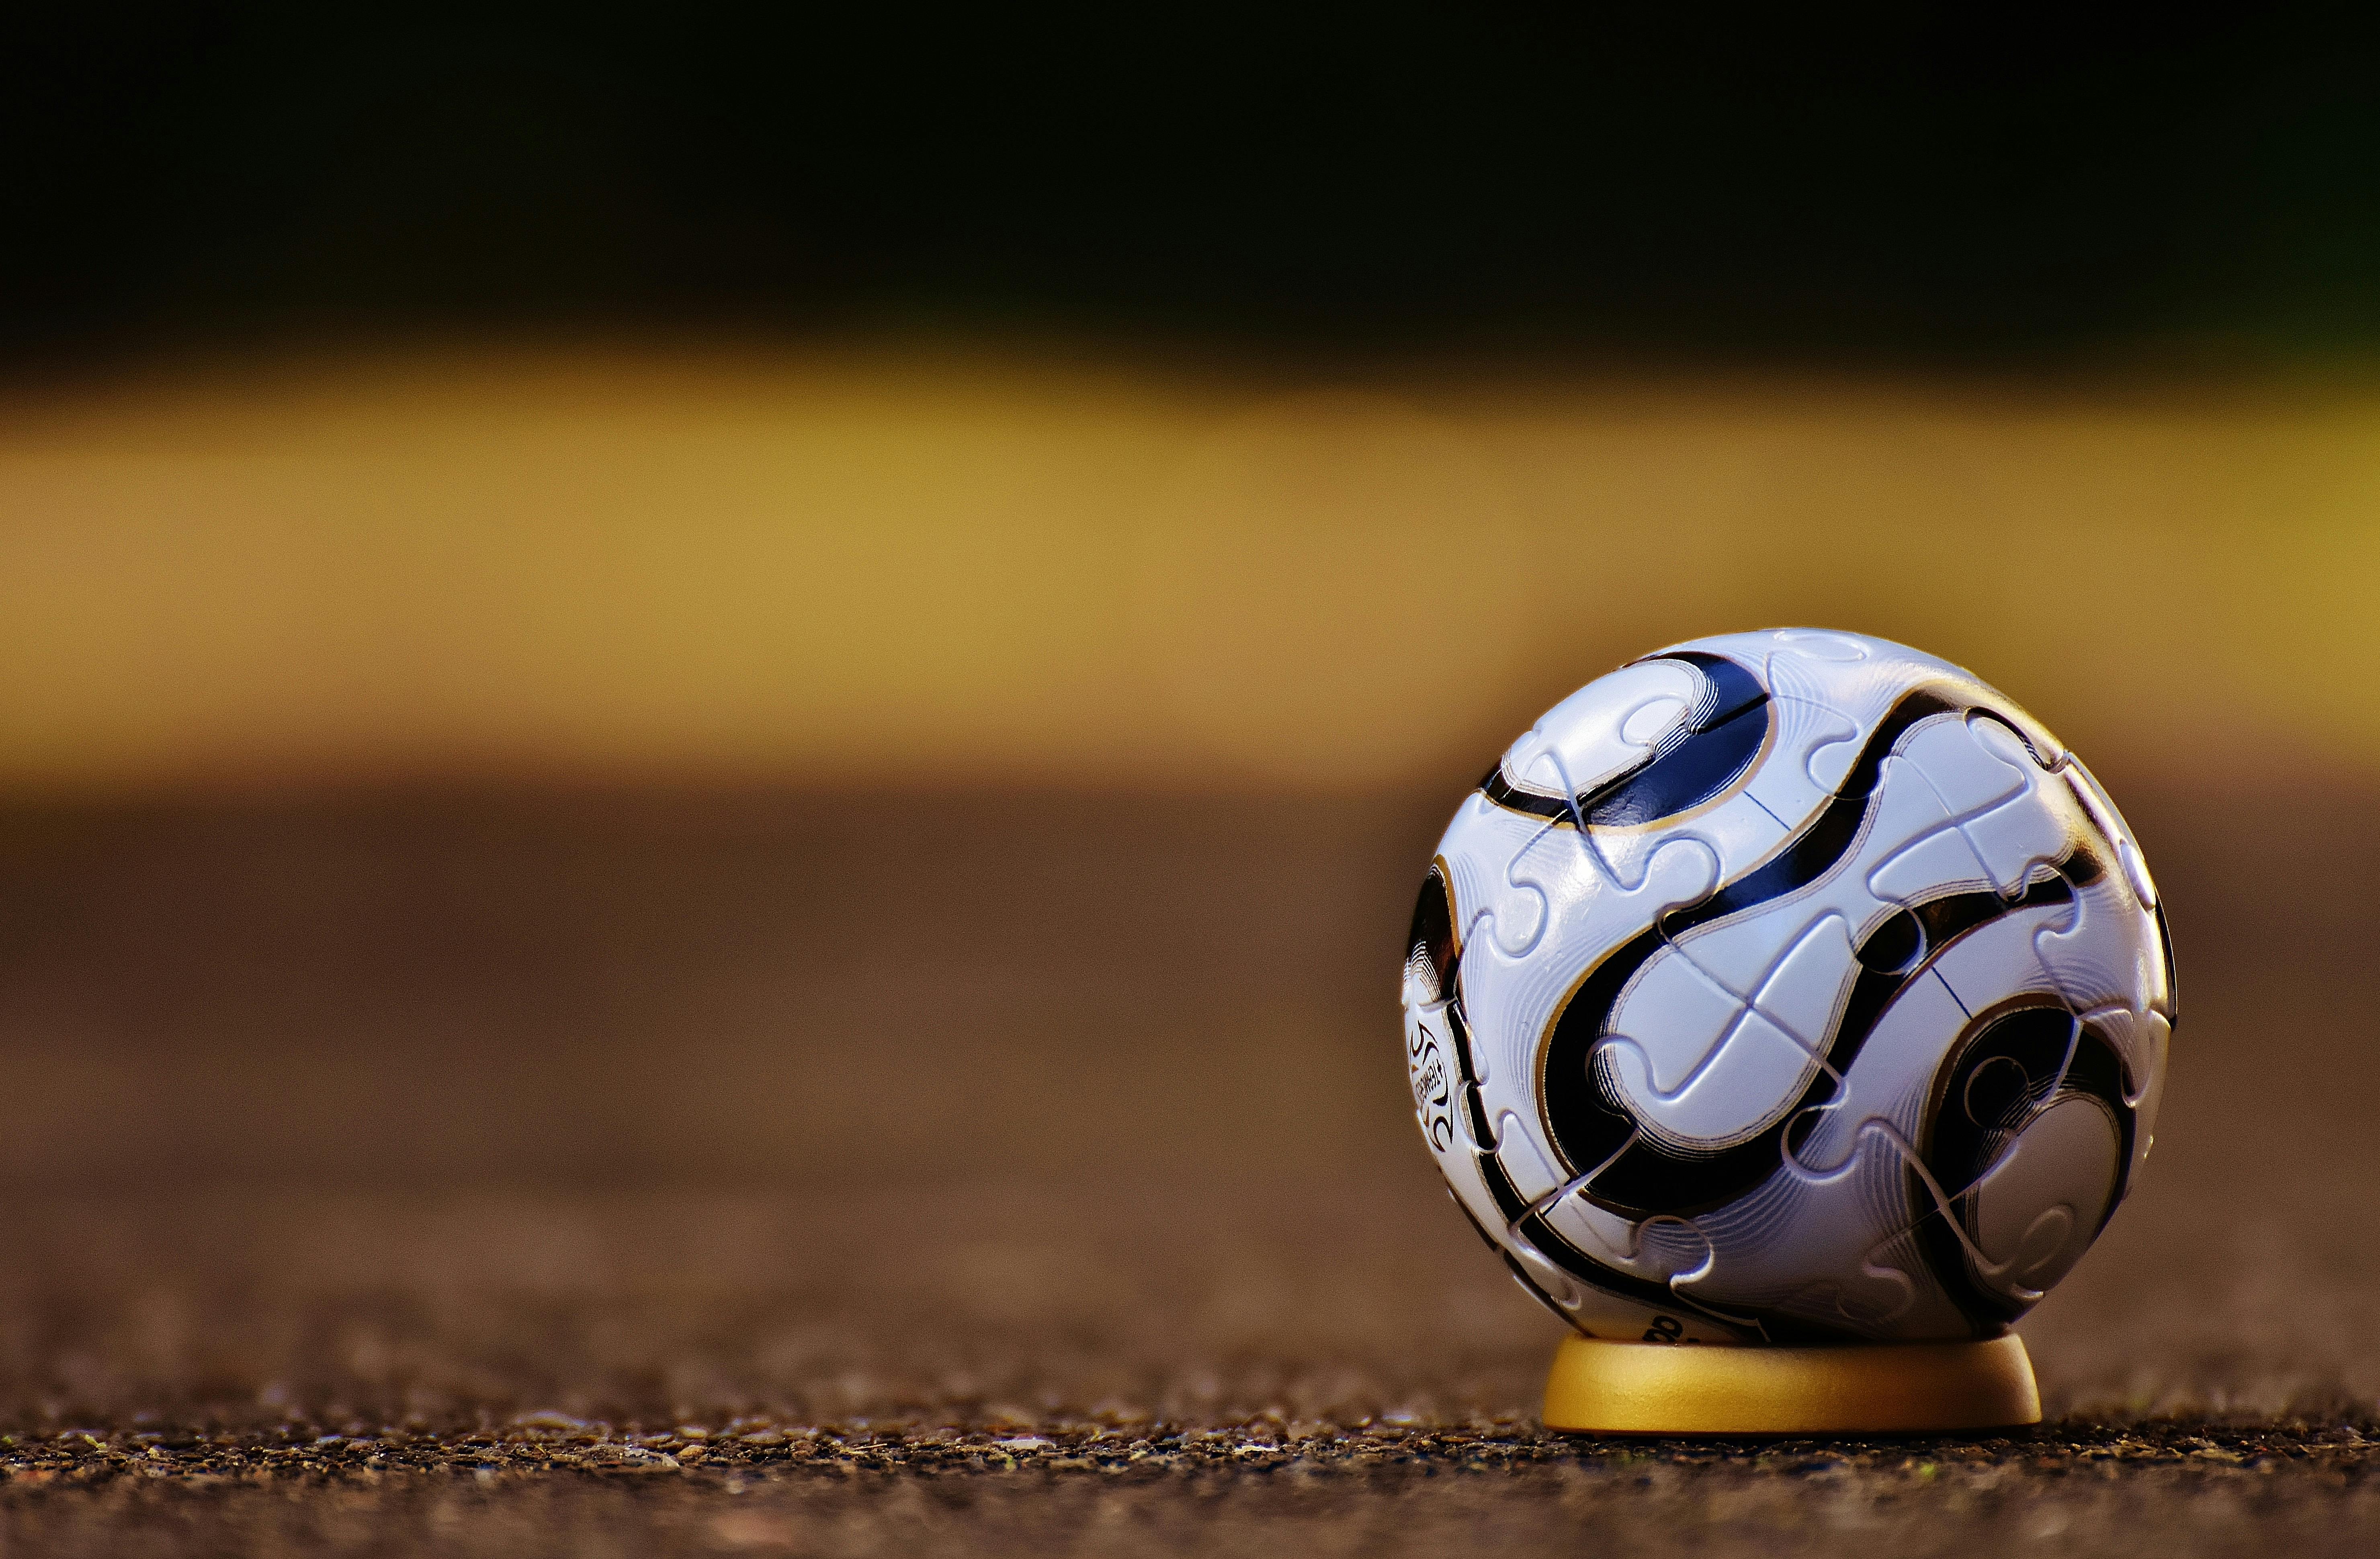 Wallpaper Orange and Black Soccer Ball on Green Grass, Background -  Download Free Image